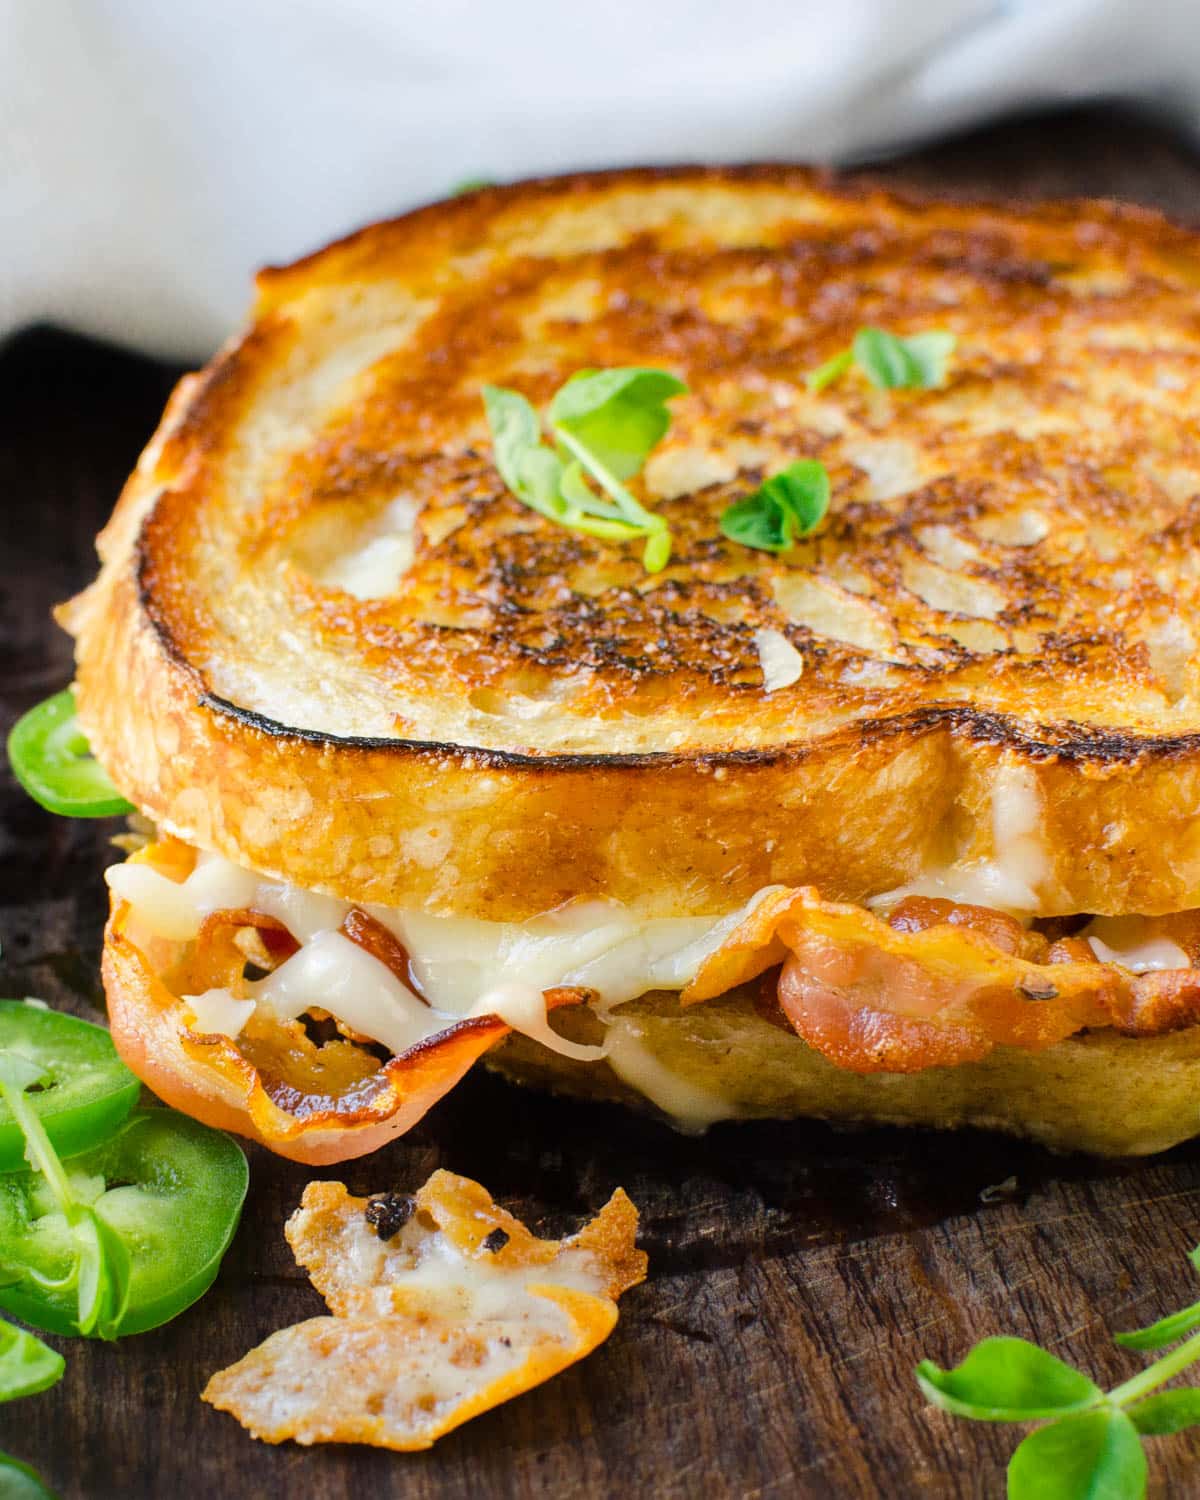 A gourmet grilled cheese sandwich.